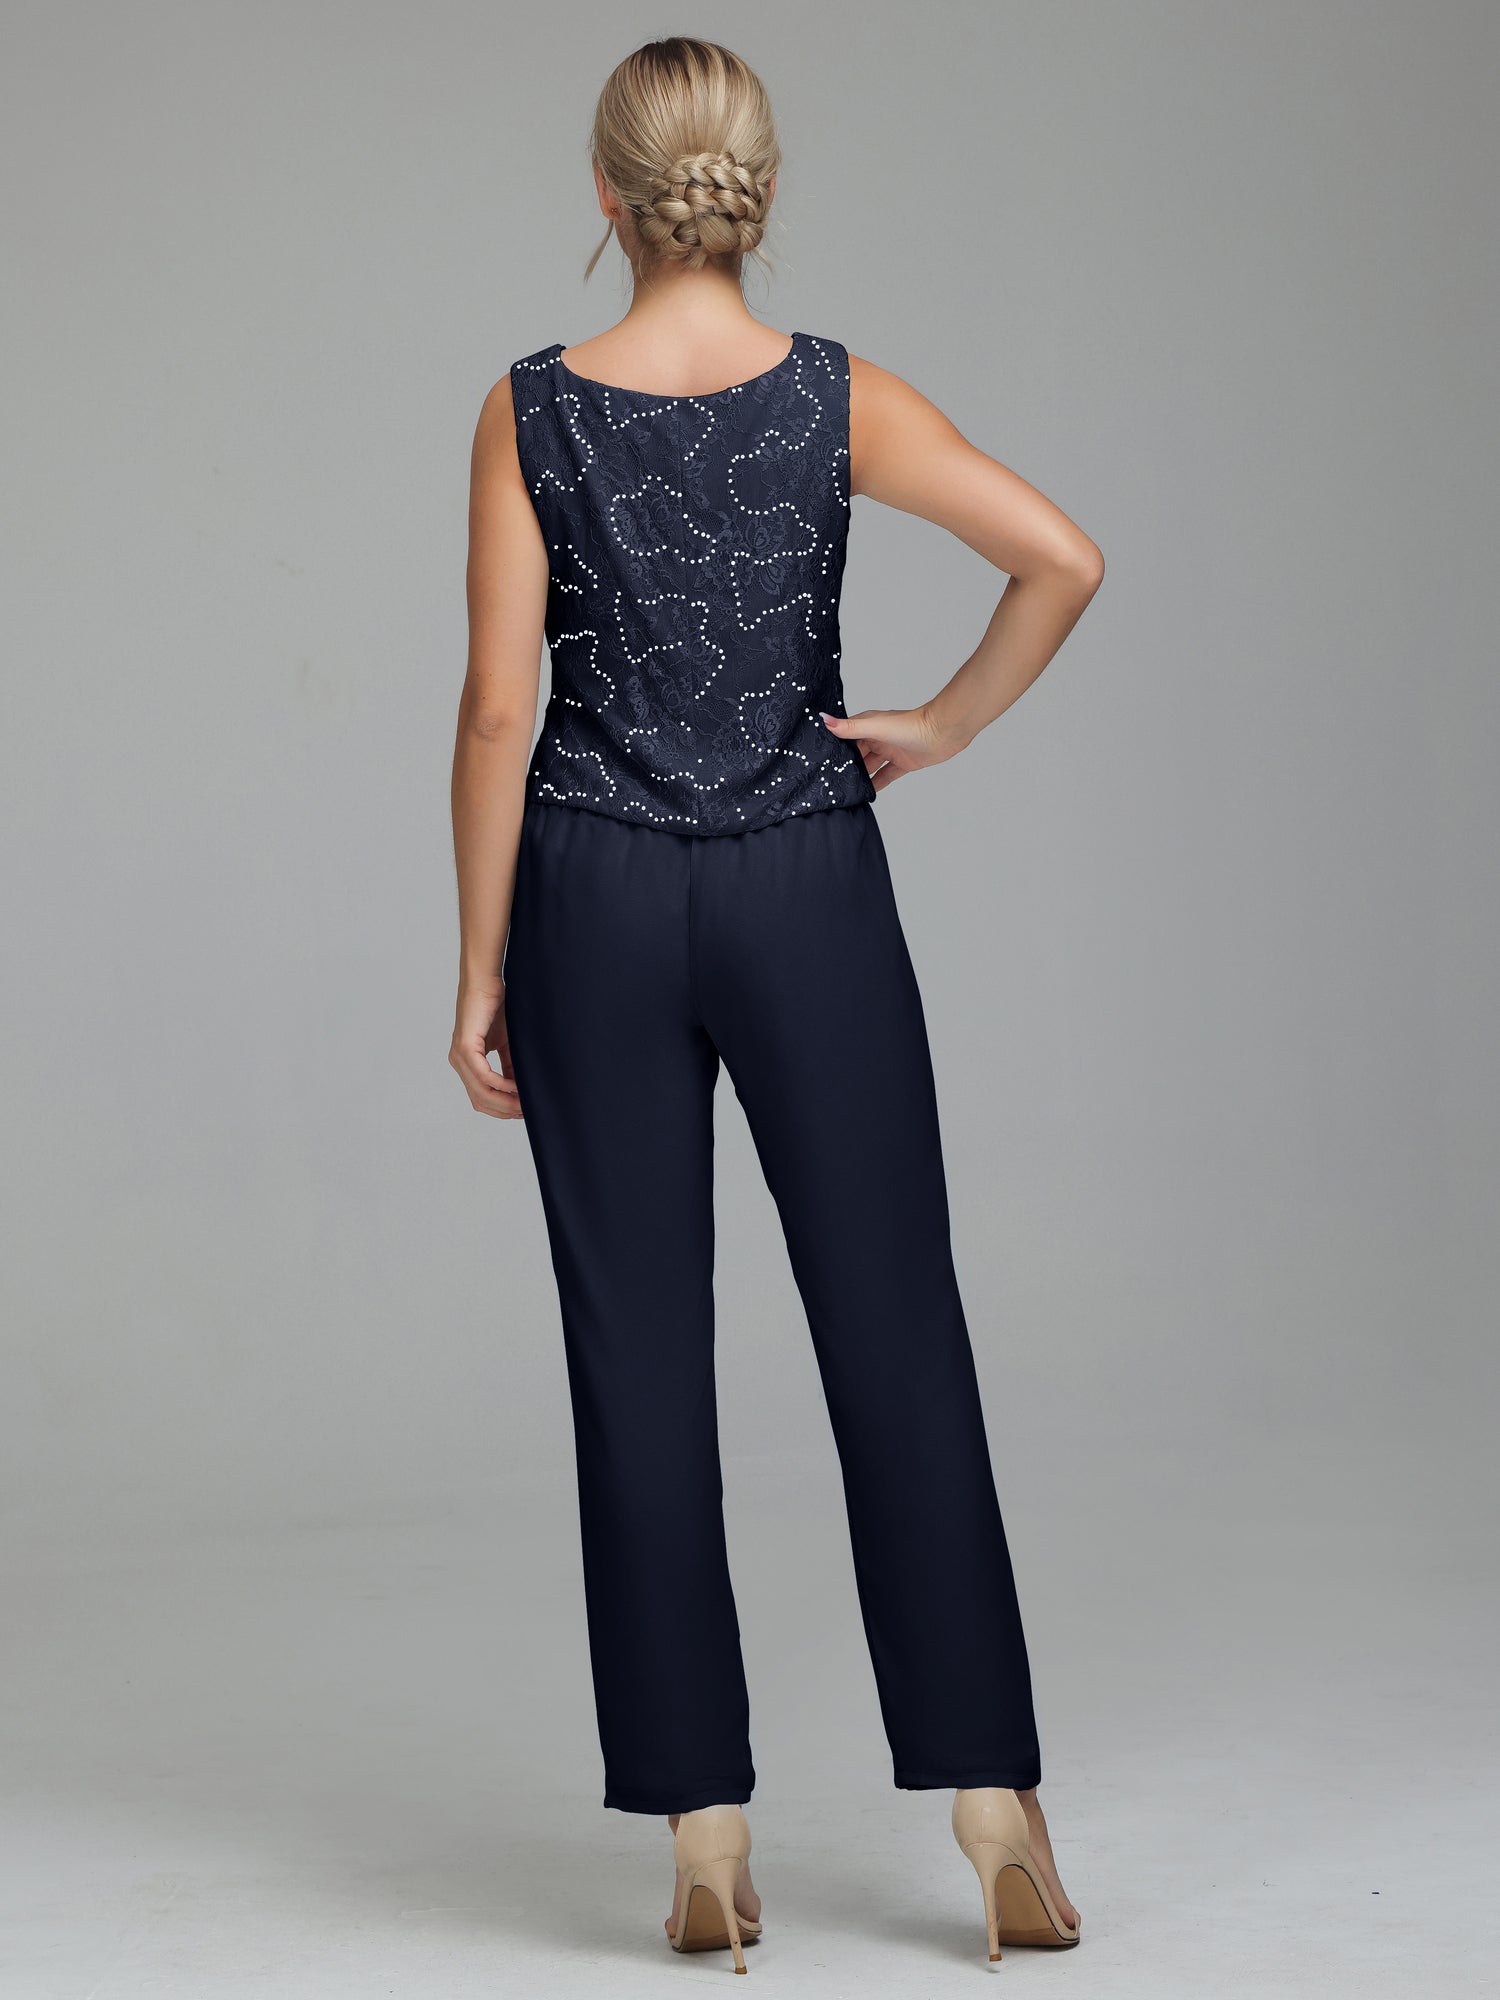 3 Pieces Chiffon Lace Mother of The Bride Pant Suits